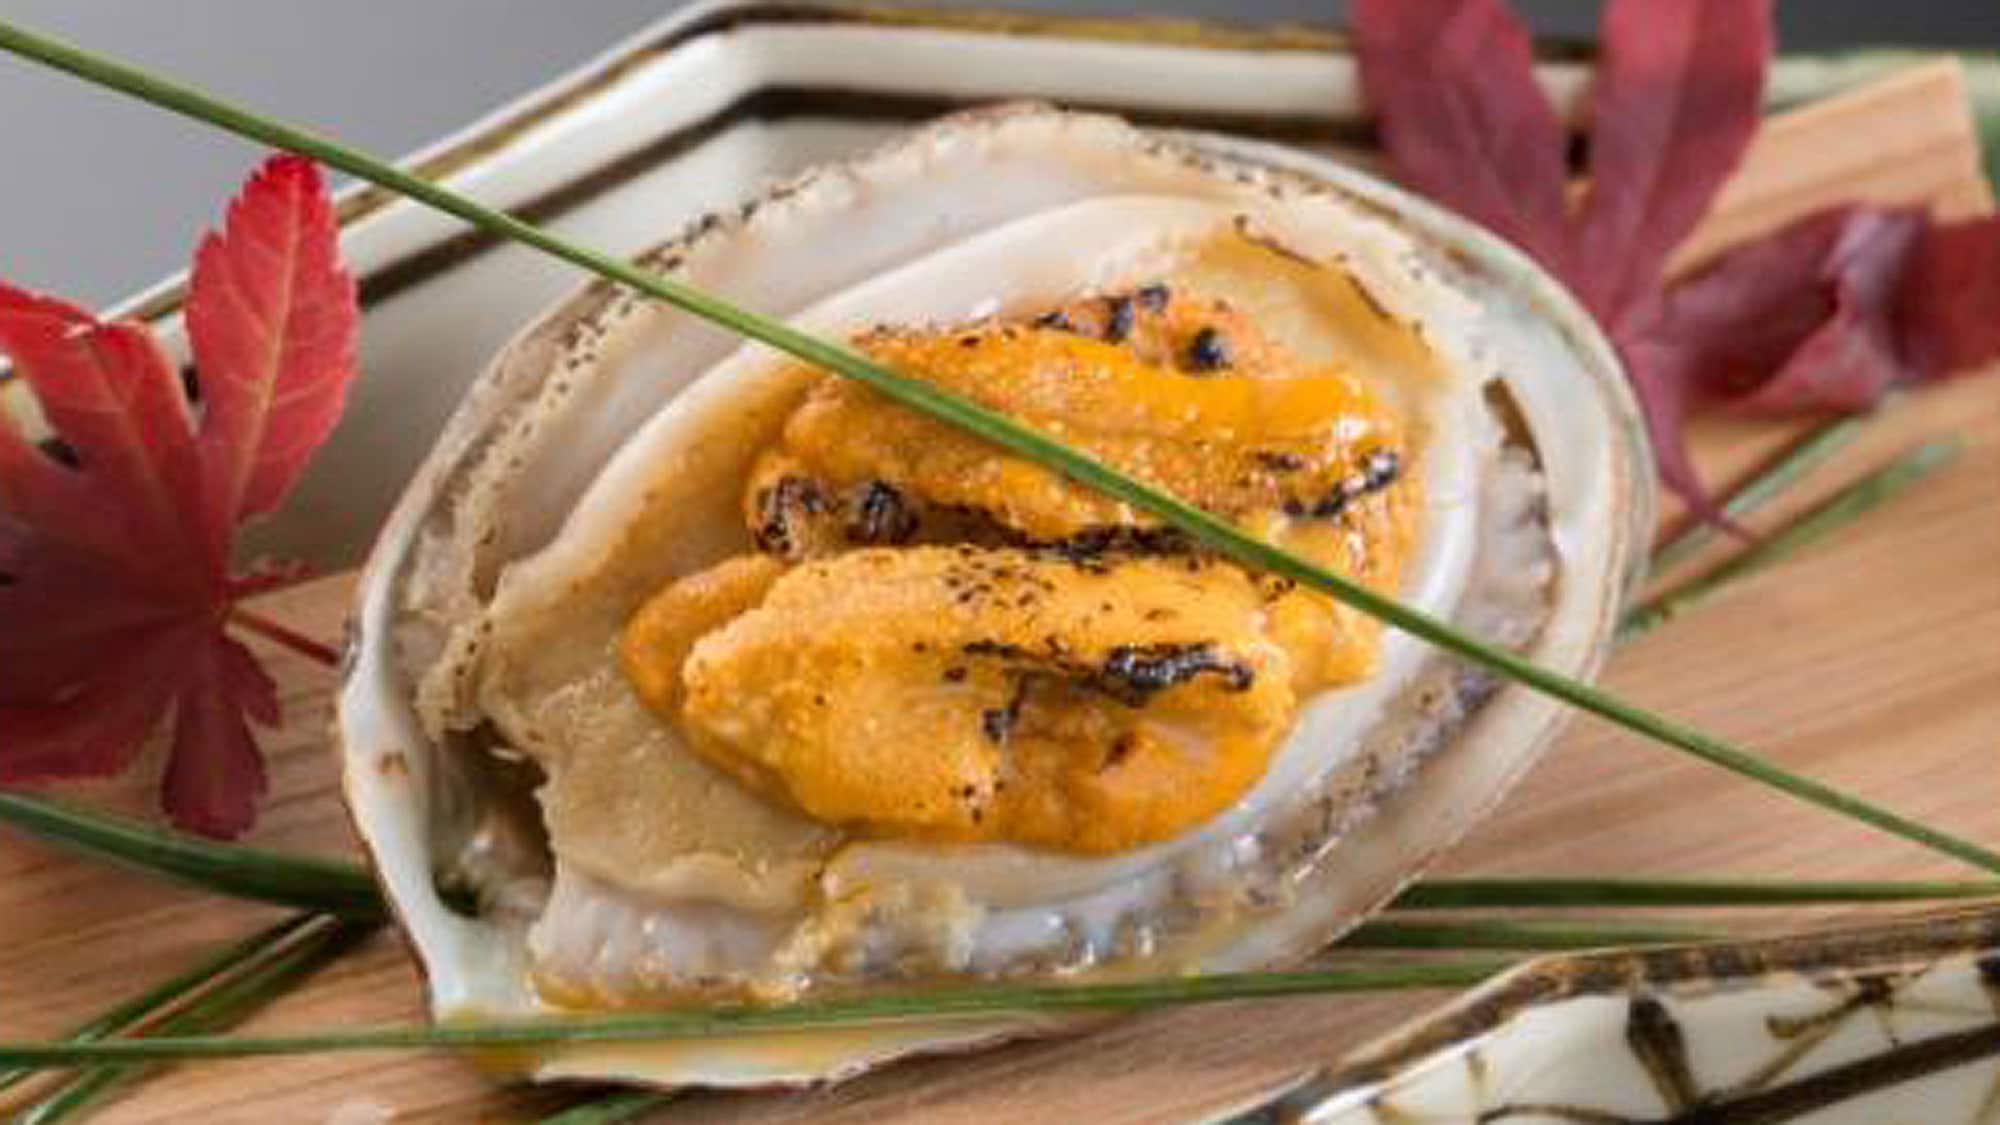 [Grilled sea urchin] A luxurious dish of "abalone" and "sea urchin"